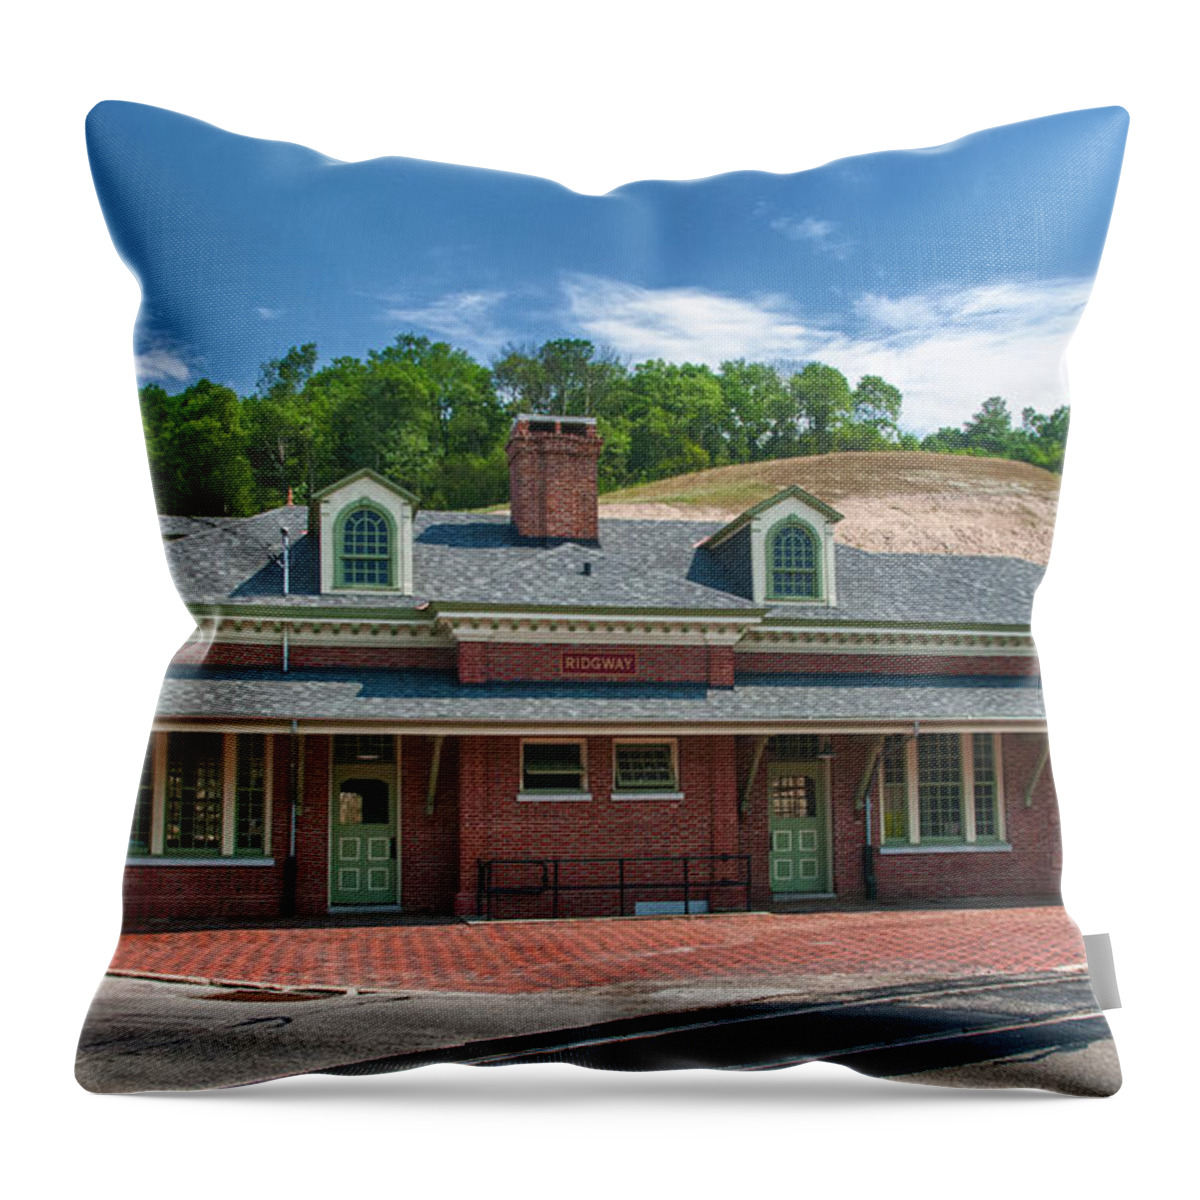 Guy Whiteley Photography Throw Pillow featuring the photograph Ridgway Depot 16747 by Guy Whiteley